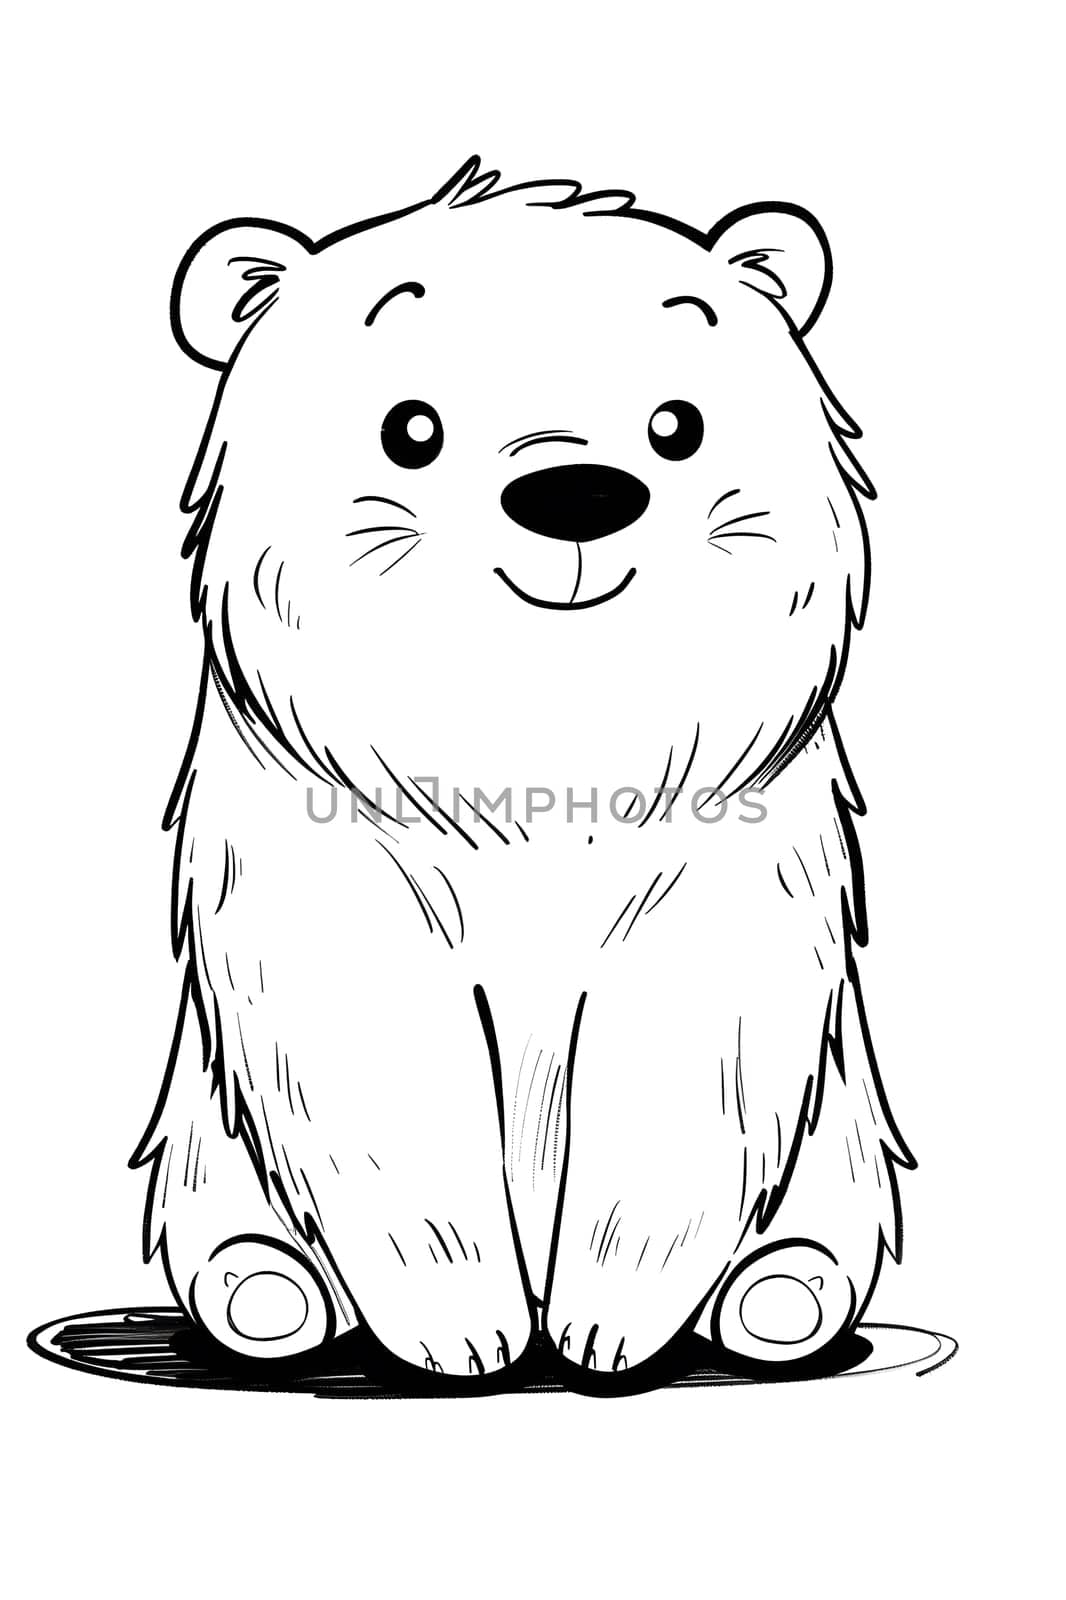 Cartoon polar bear sitting with a happy smile, jaw dropped in a cute gesture by Nadtochiy